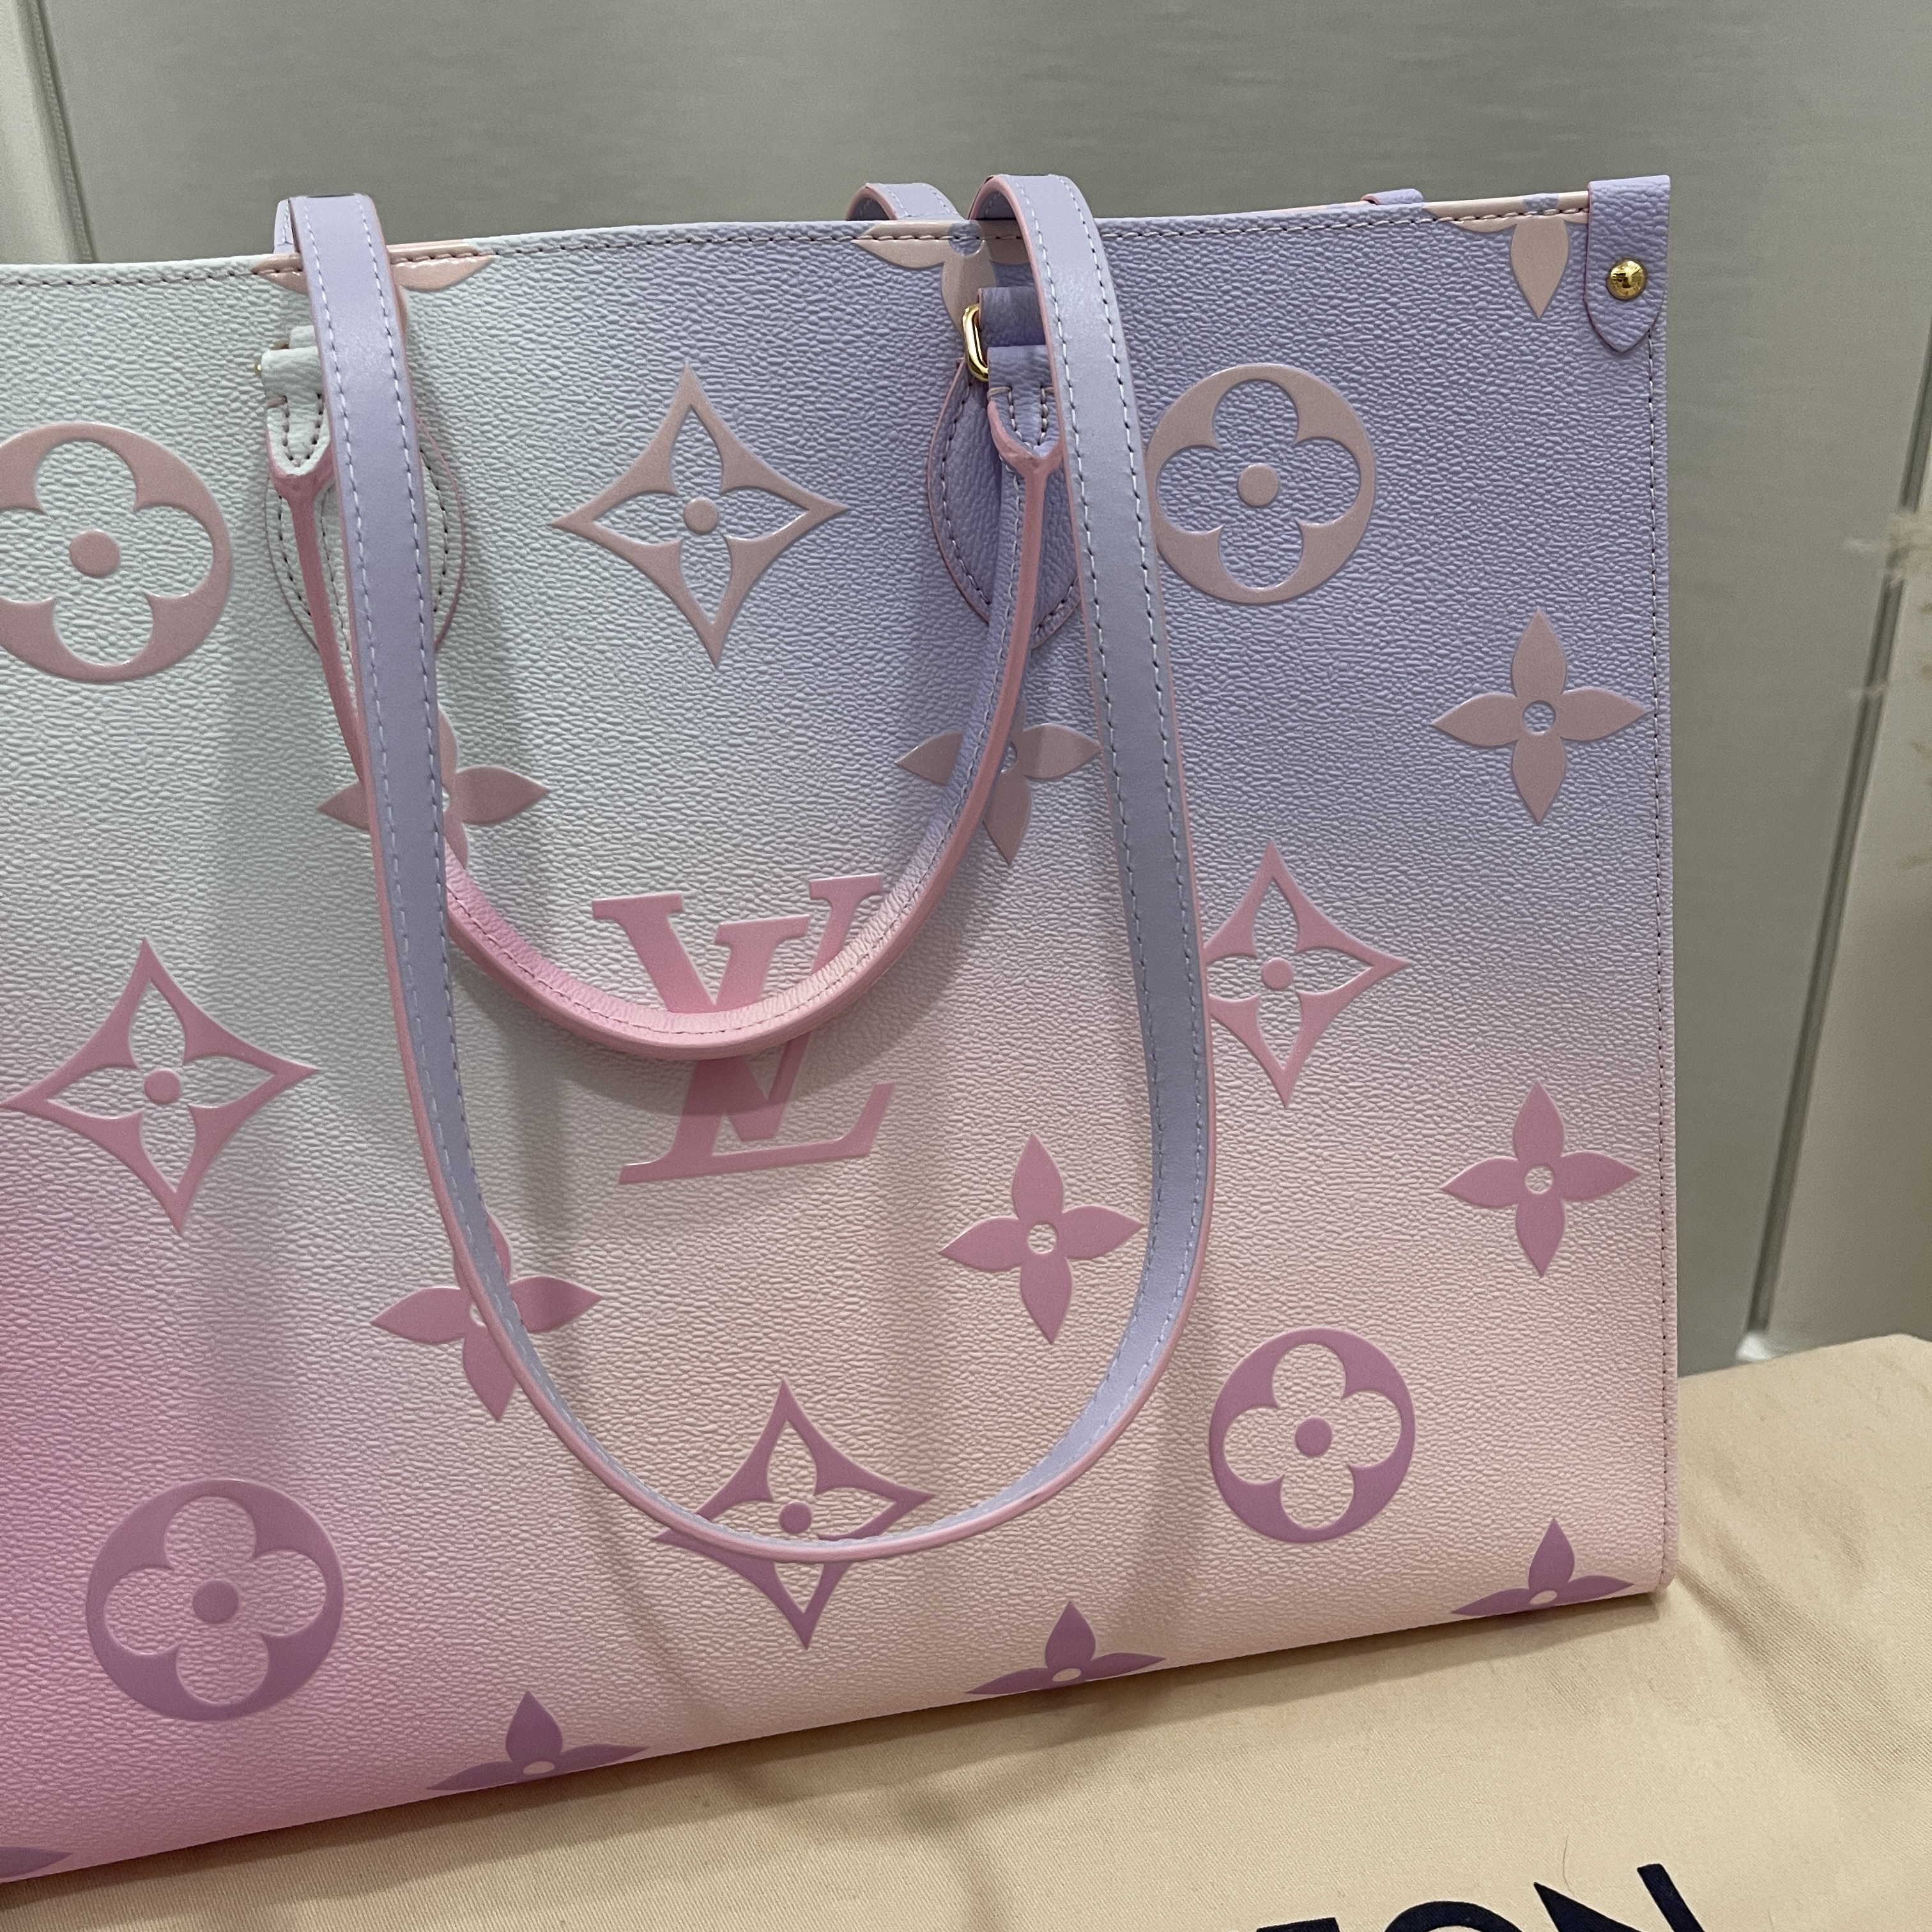 LOUIS VUITTON Monogram Giant Spring In The City Onthego PM Sunrise